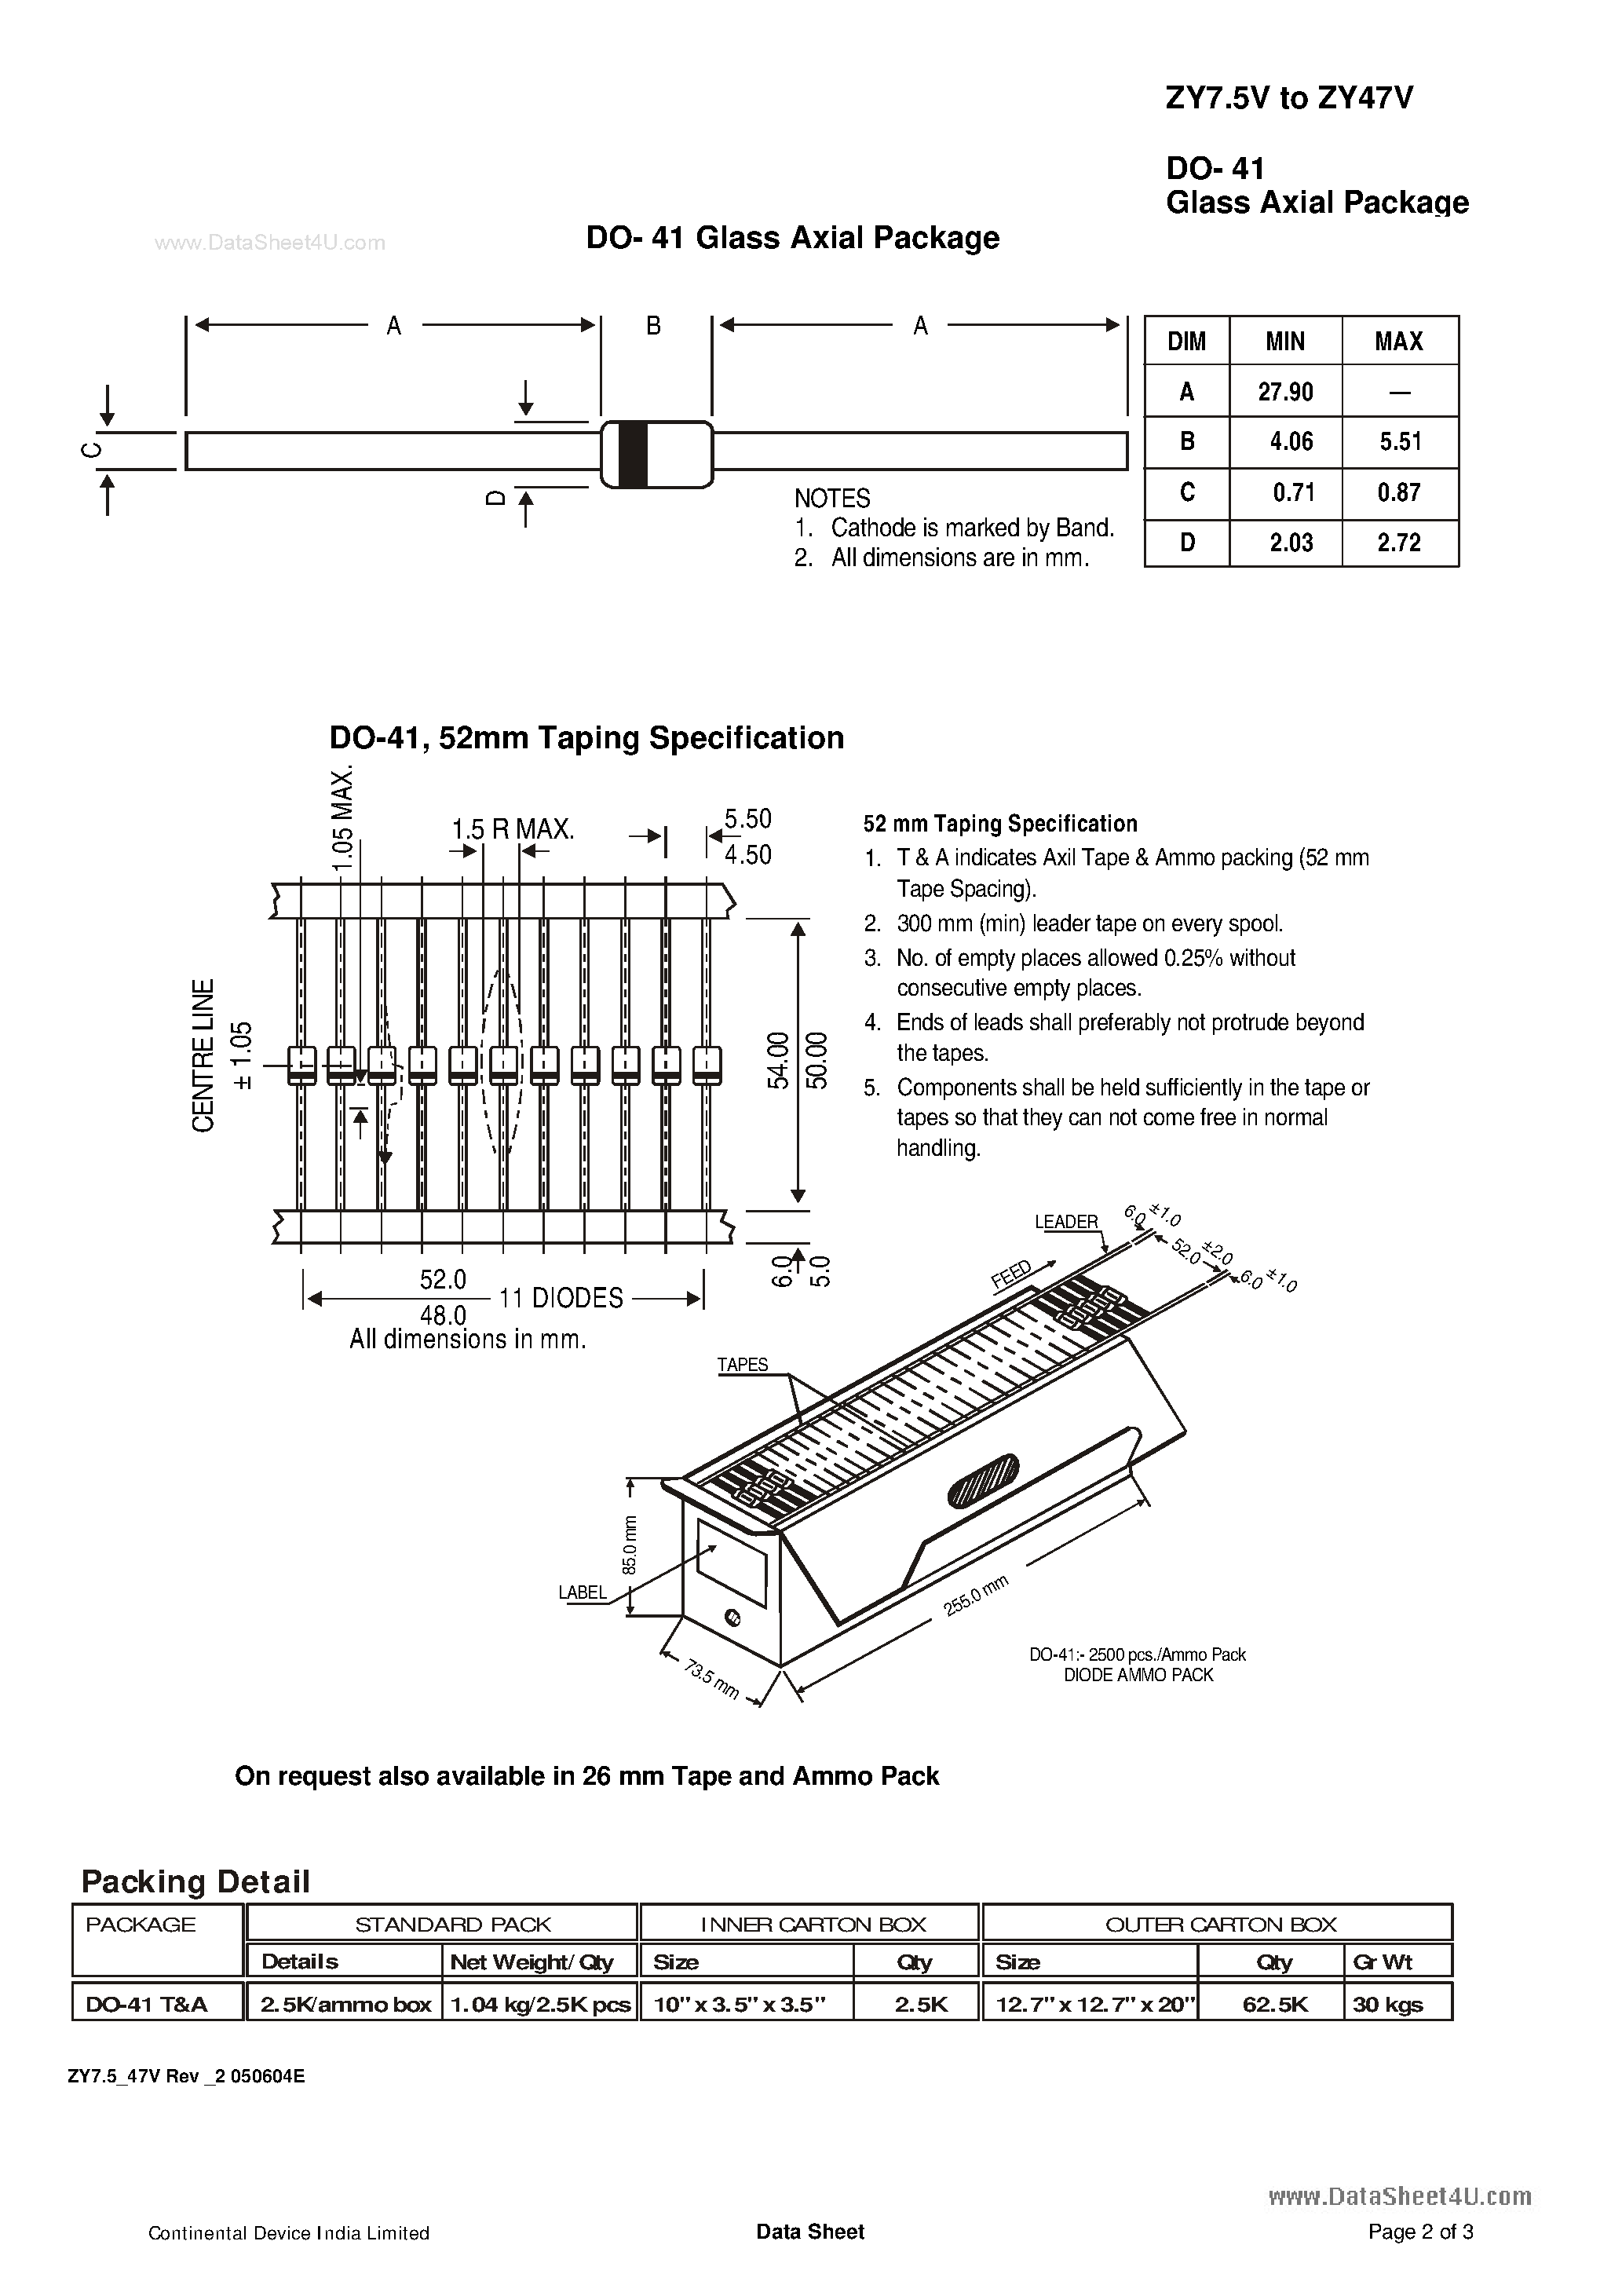 Datasheet ZY7.5 - SILICON GLASS PASSIVATED 2.0 WATT ZENER DIODES page 2